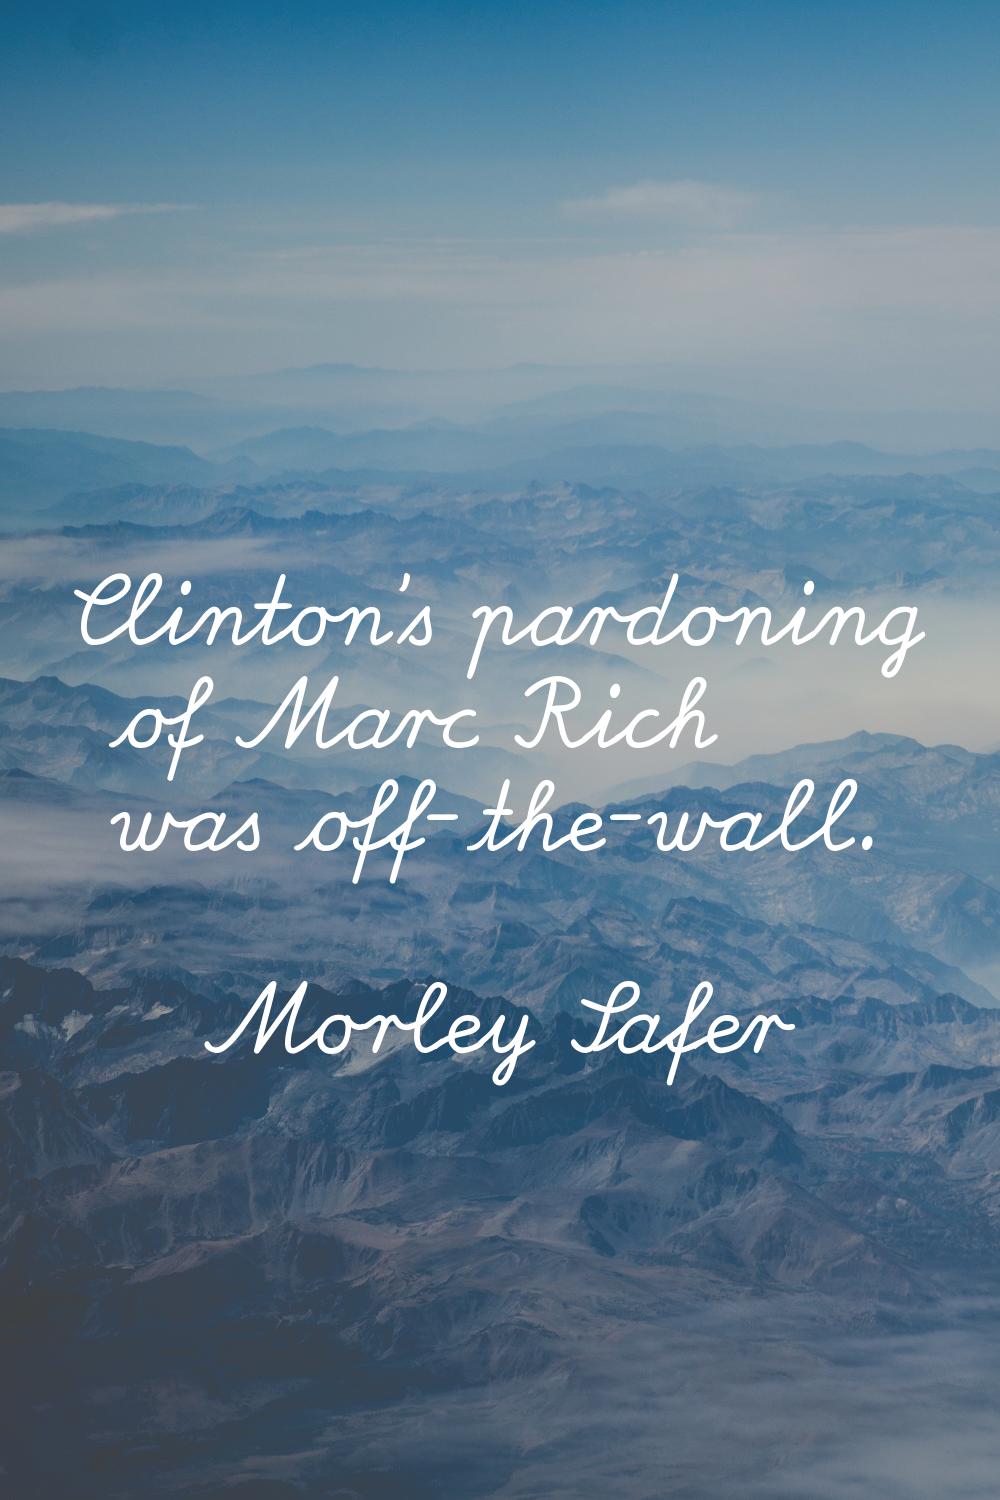 Clinton's pardoning of Marc Rich was off-the-wall.